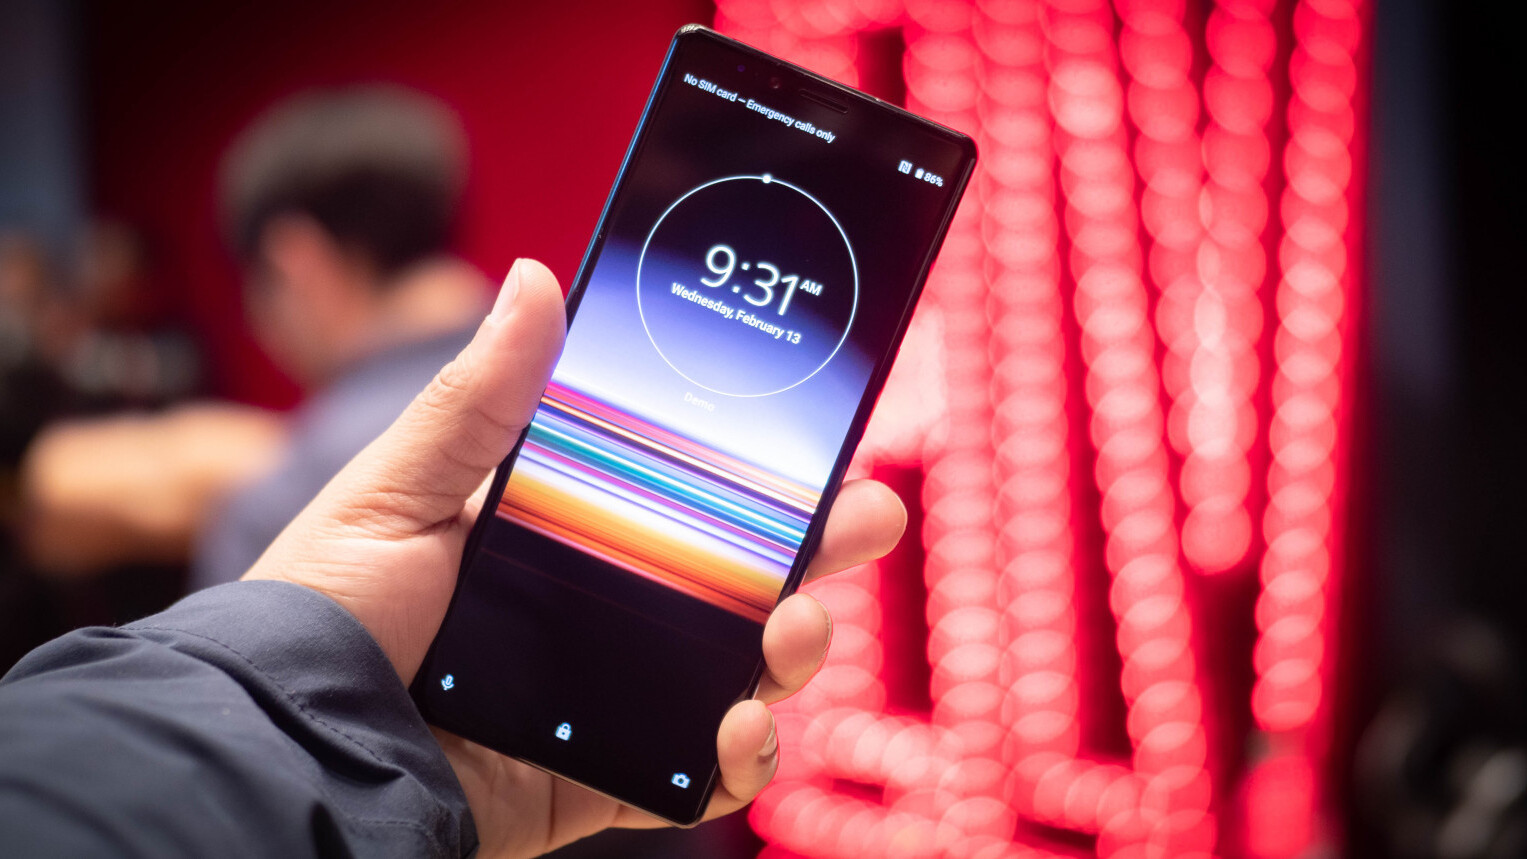 Xperia 1 and 10 hands-on: Sony makes the case for super-tall phones